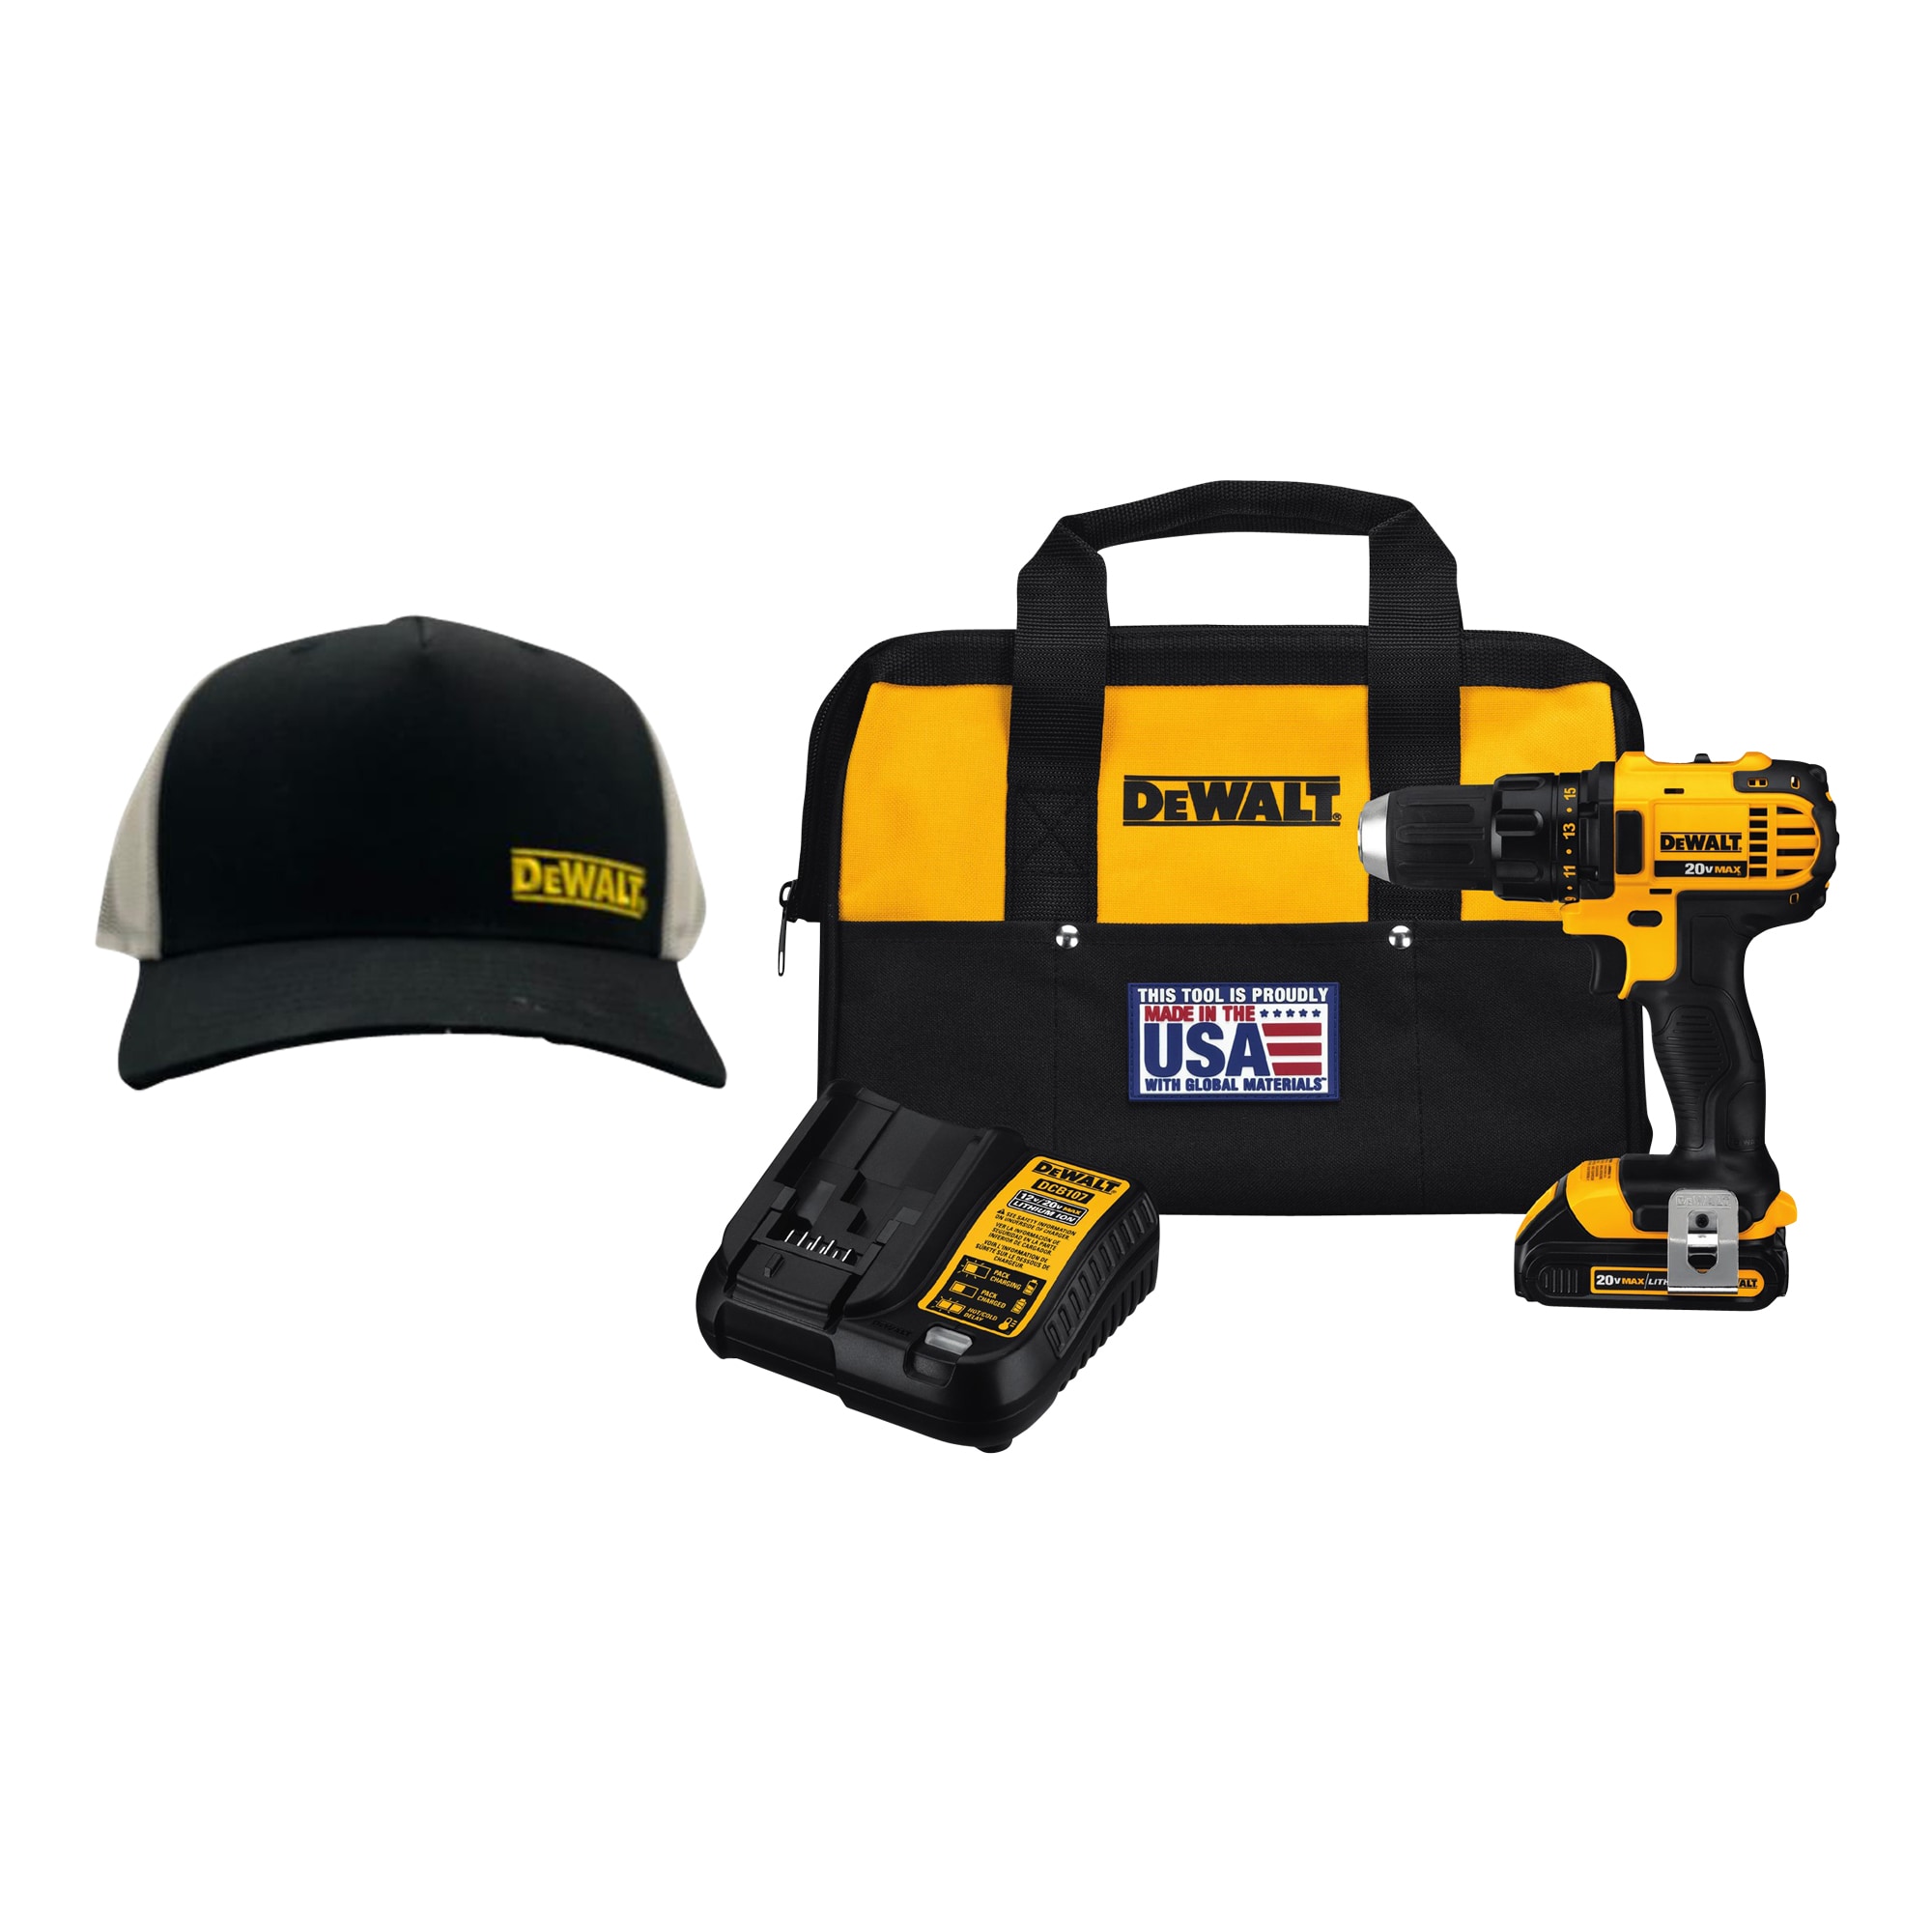 Shop DEWALT Max Brushless Cordless Drill (2-Batteries Included and Charger Included) Black and Yellow Mesh Back Trucker Hat at